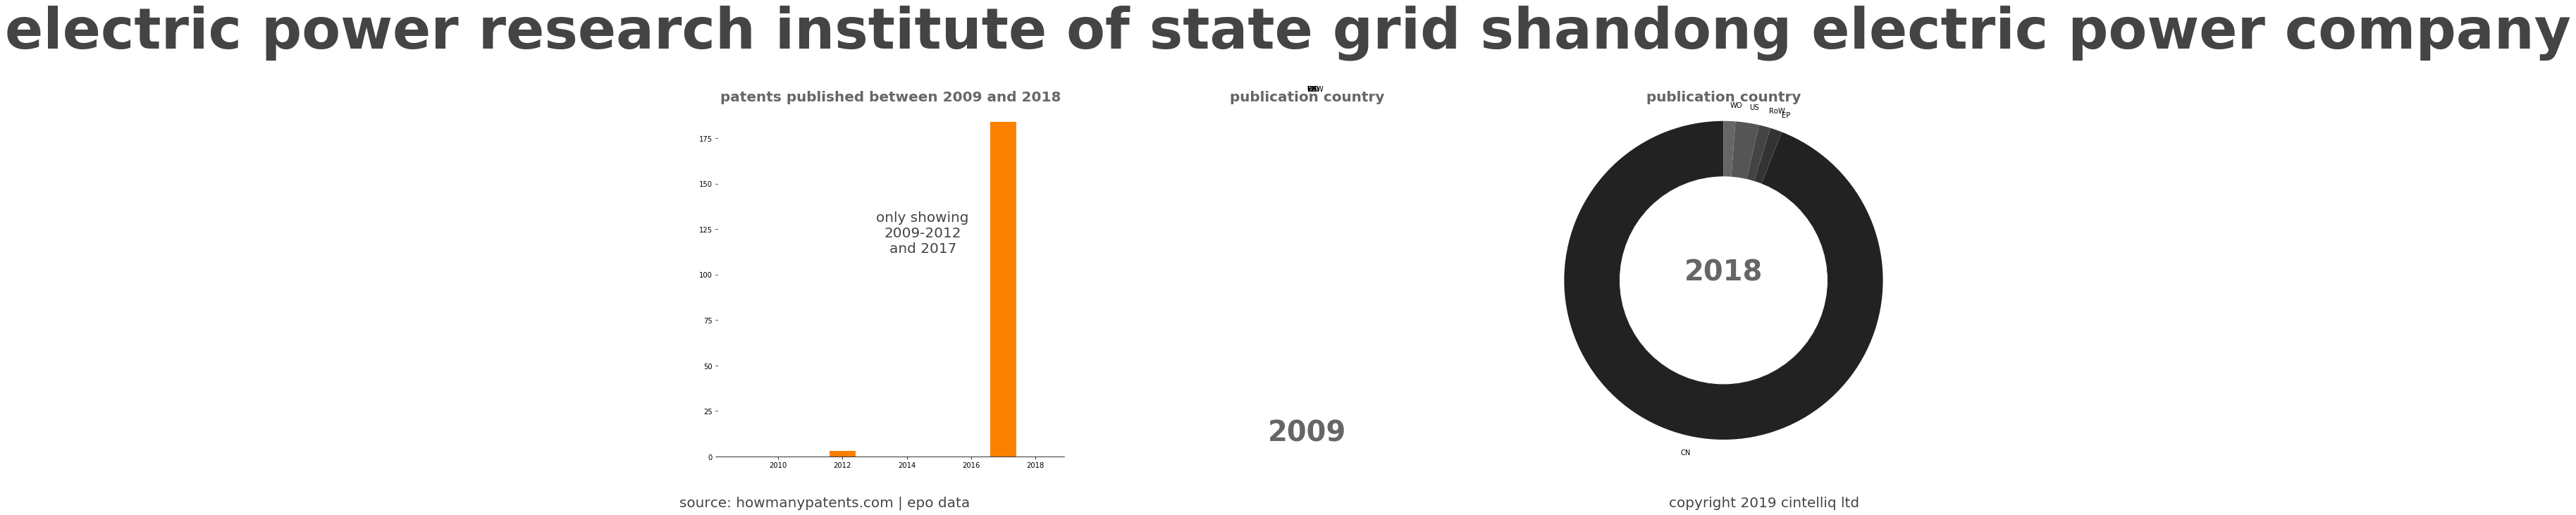 summary of patents for Electric Power Research Institute Of State Grid Shandong Electric Power Company